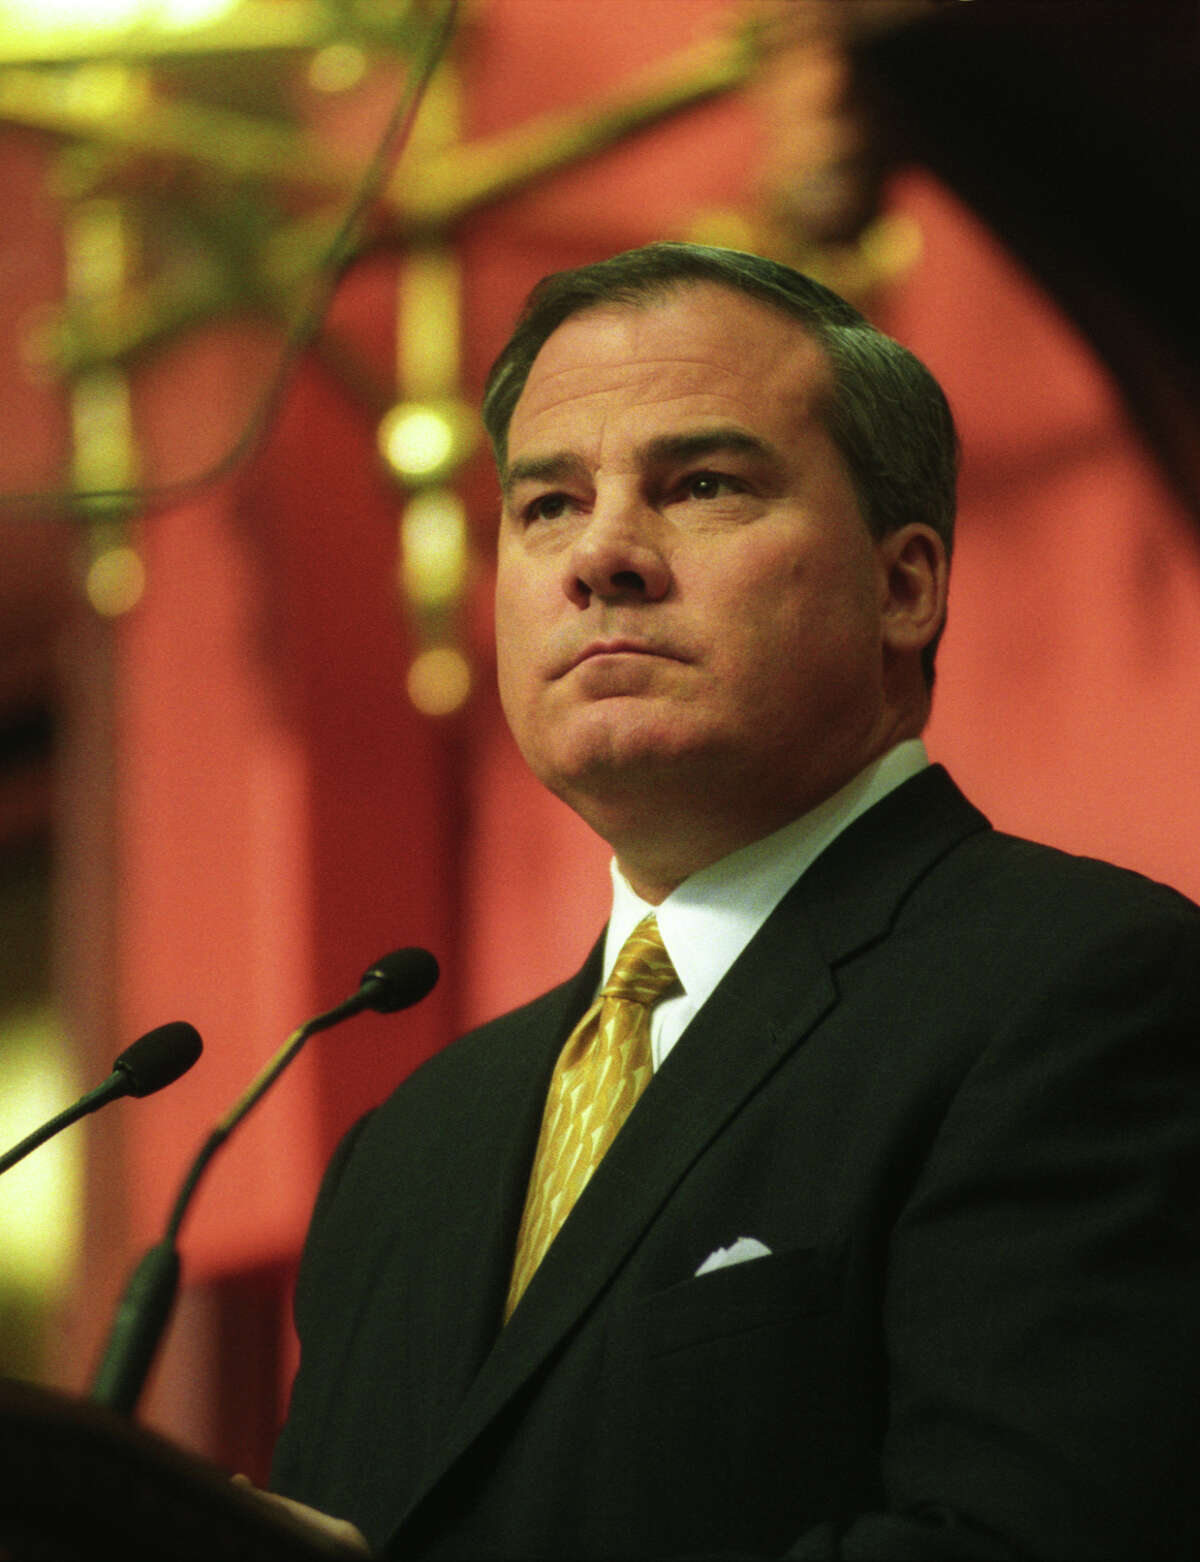 Governor John G. Rowland delivers his State of the State address to the legislature in Hartford on Feb. 4, 2004.